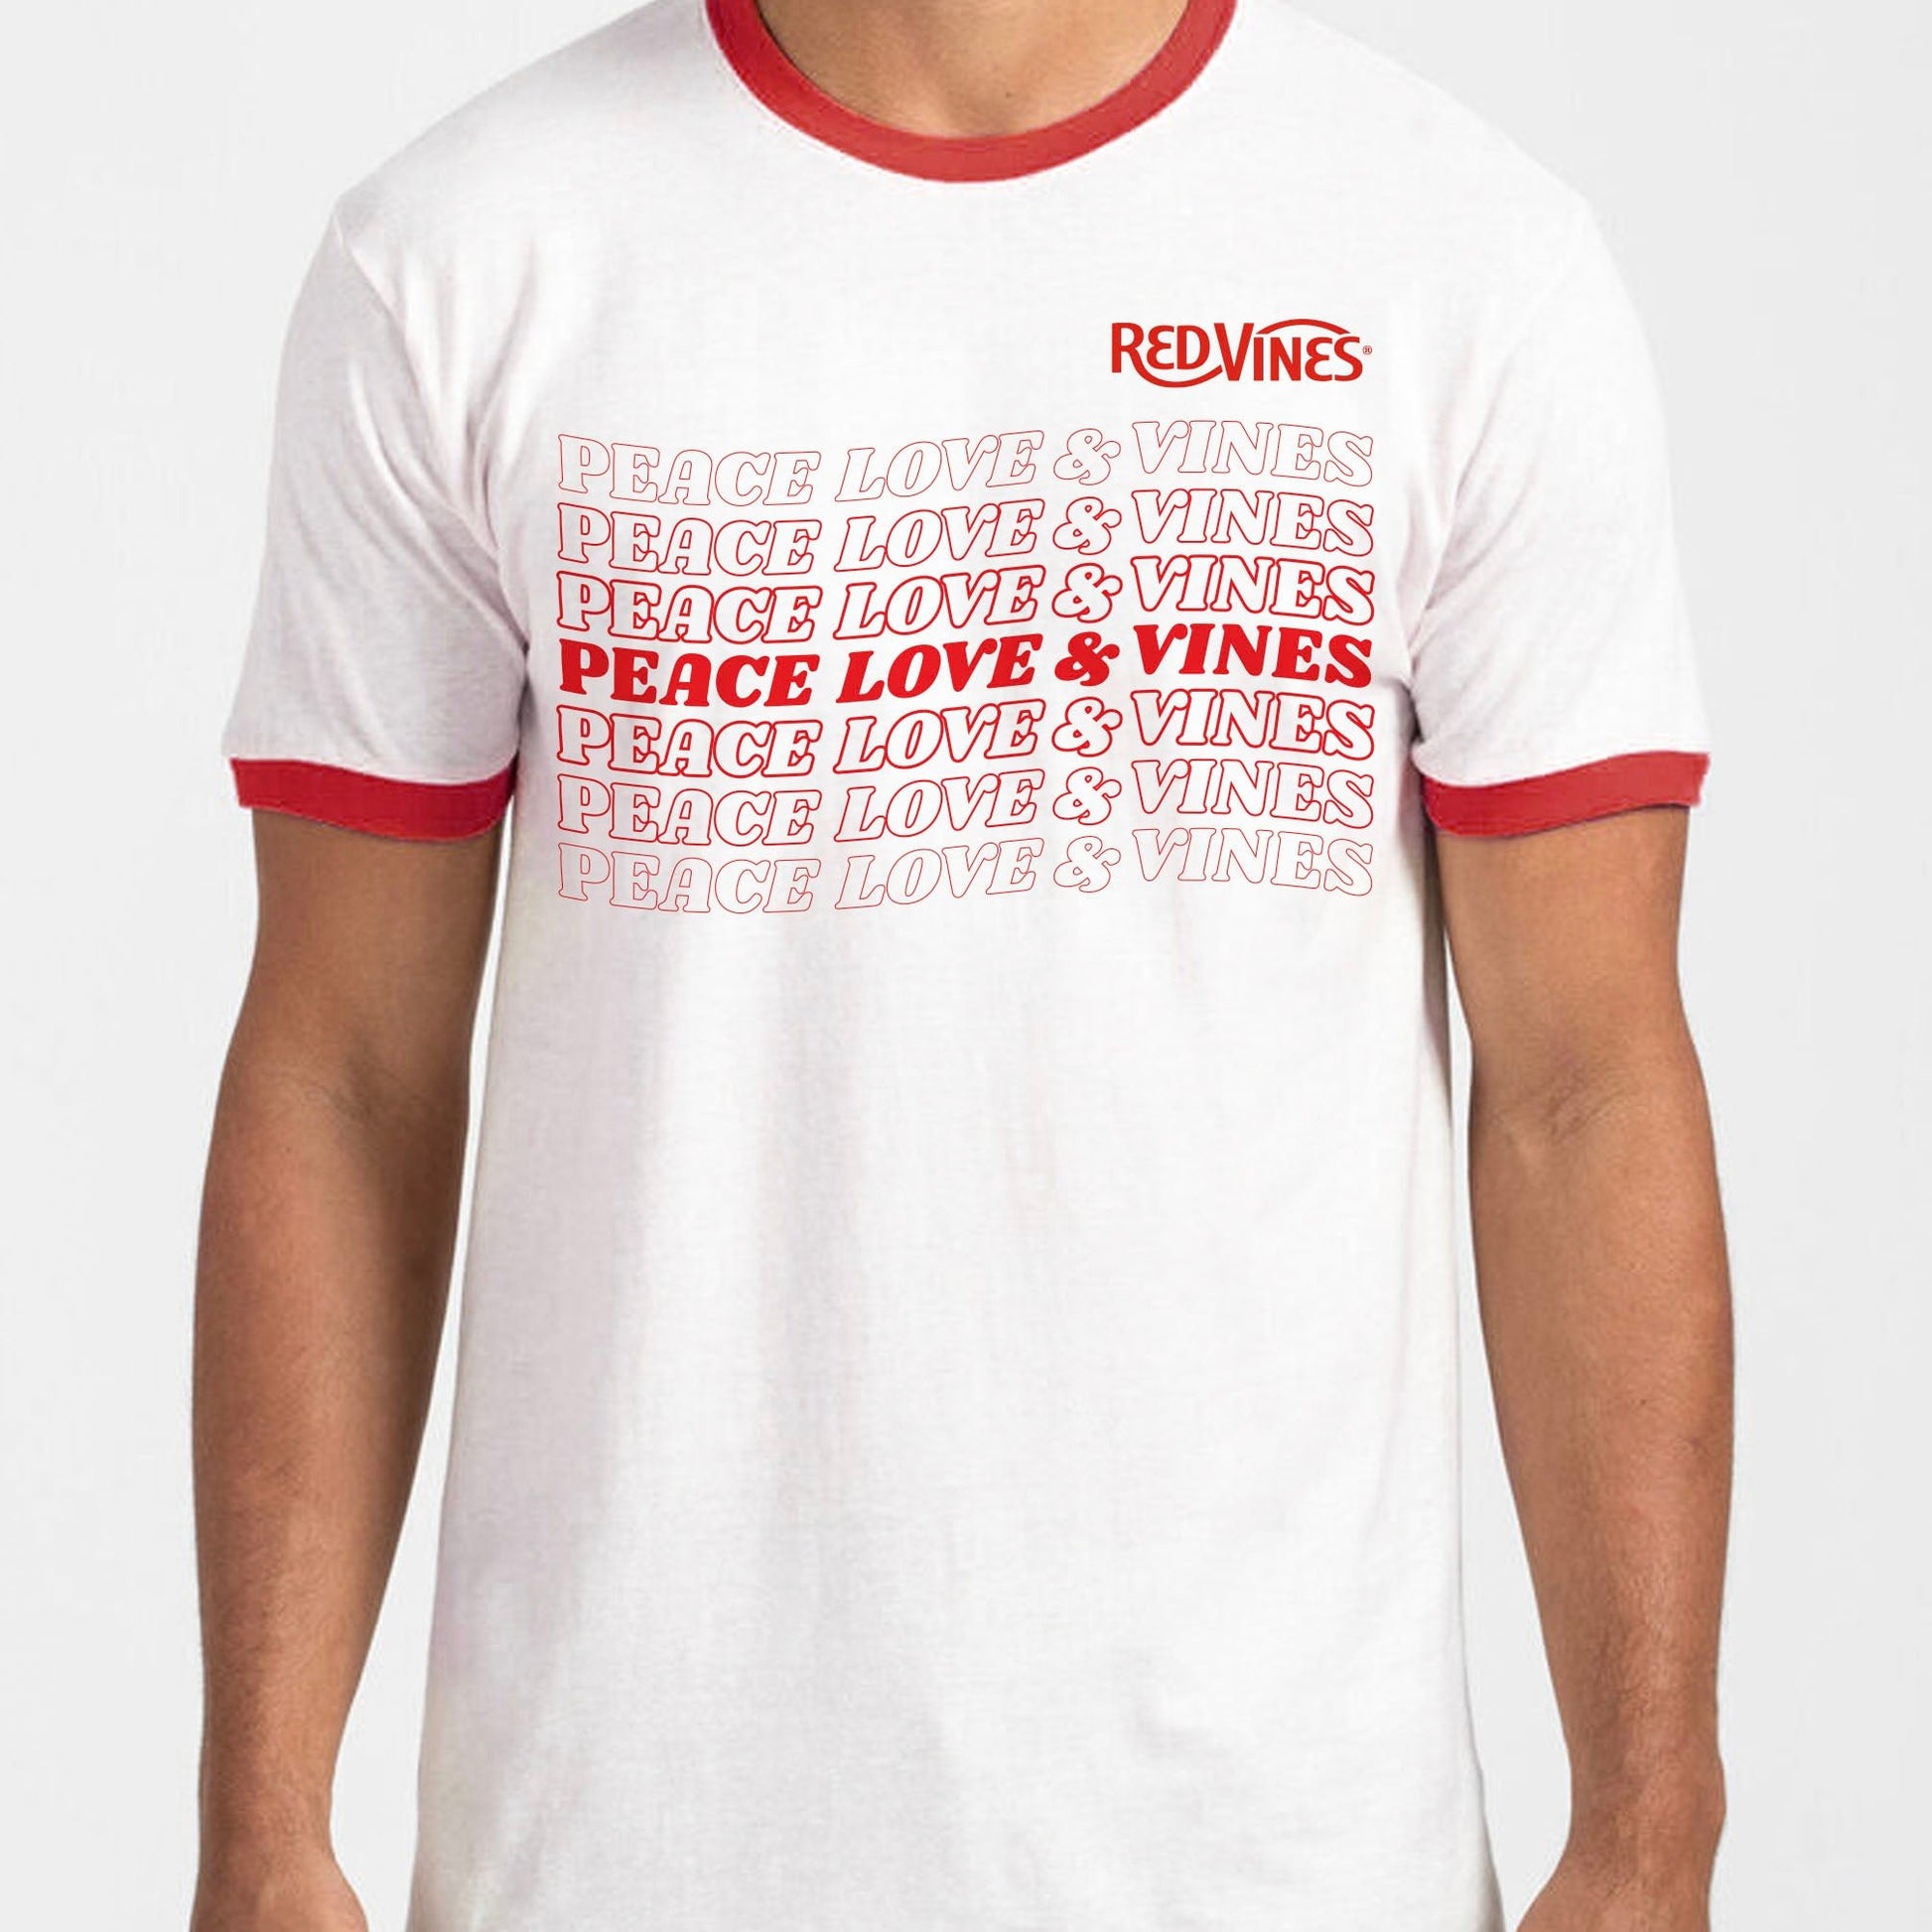 RED VINES Red and White Peace, Love & Vines T-Shirt with RED VINES logo in the upper left chest and written across the chest 7 times, faded in and out, "PEACE LOVE & VINES"